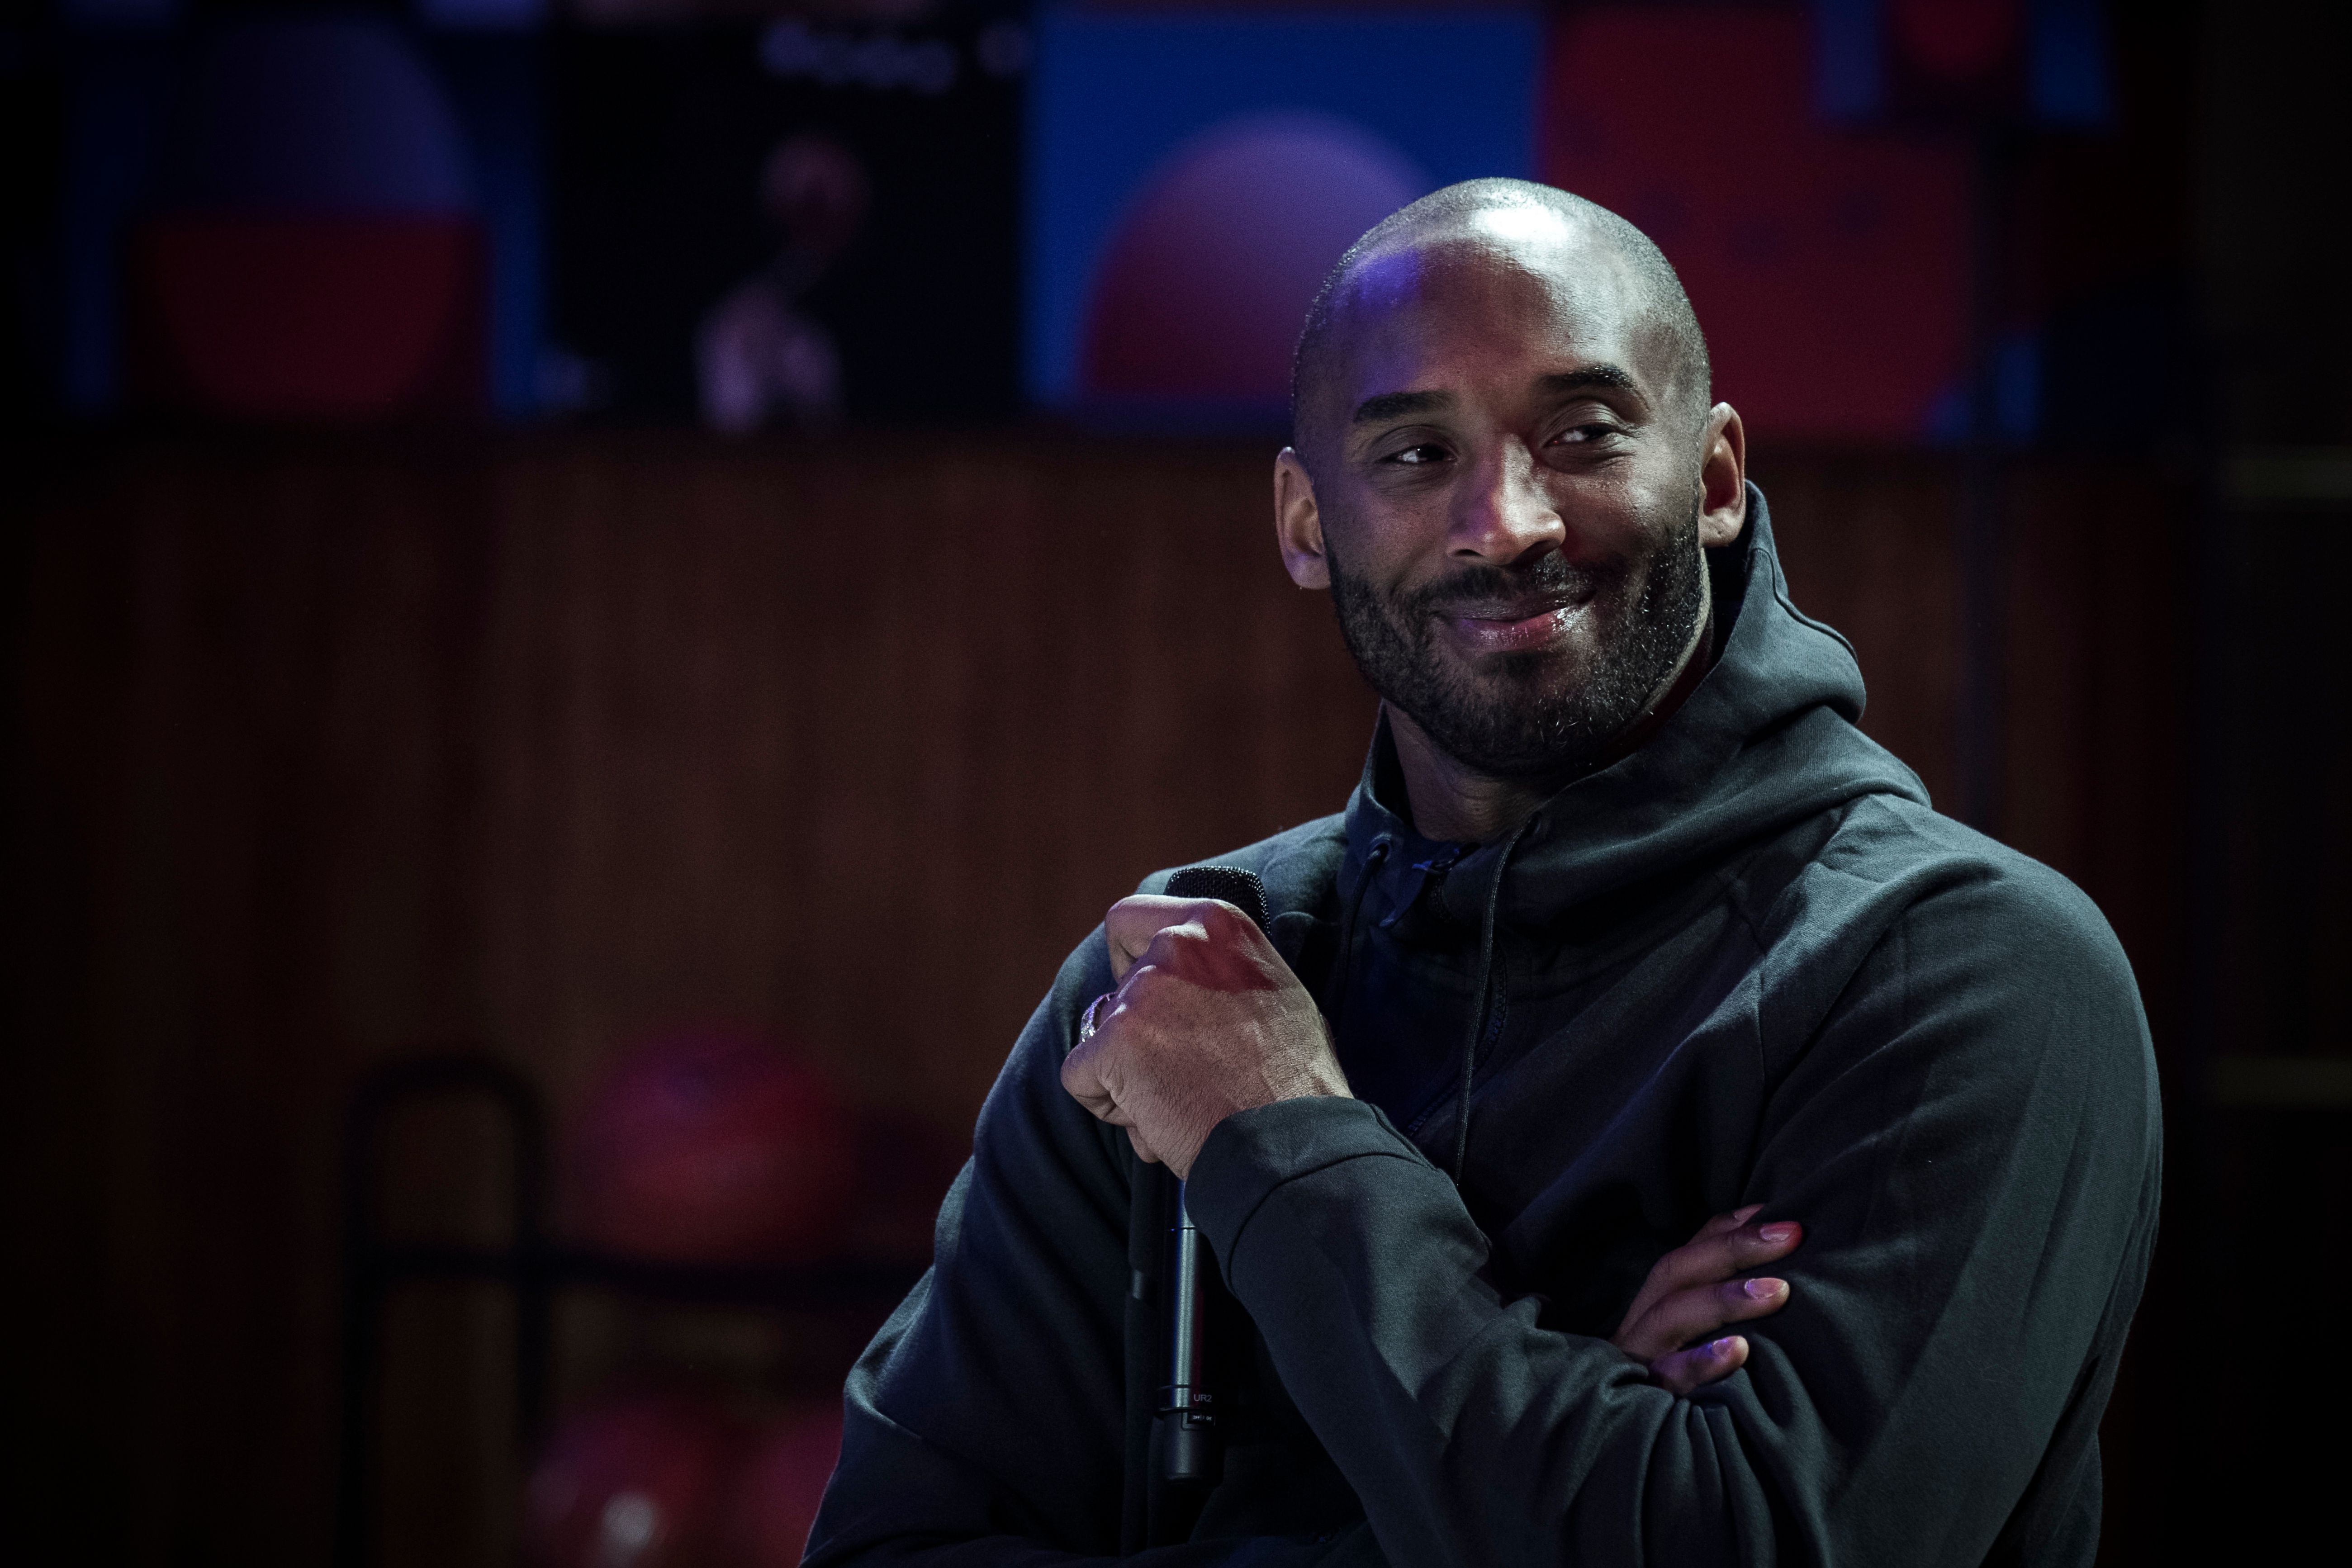 Late NBA player Kobe Bryant smiling at a promotional event organized by Nike